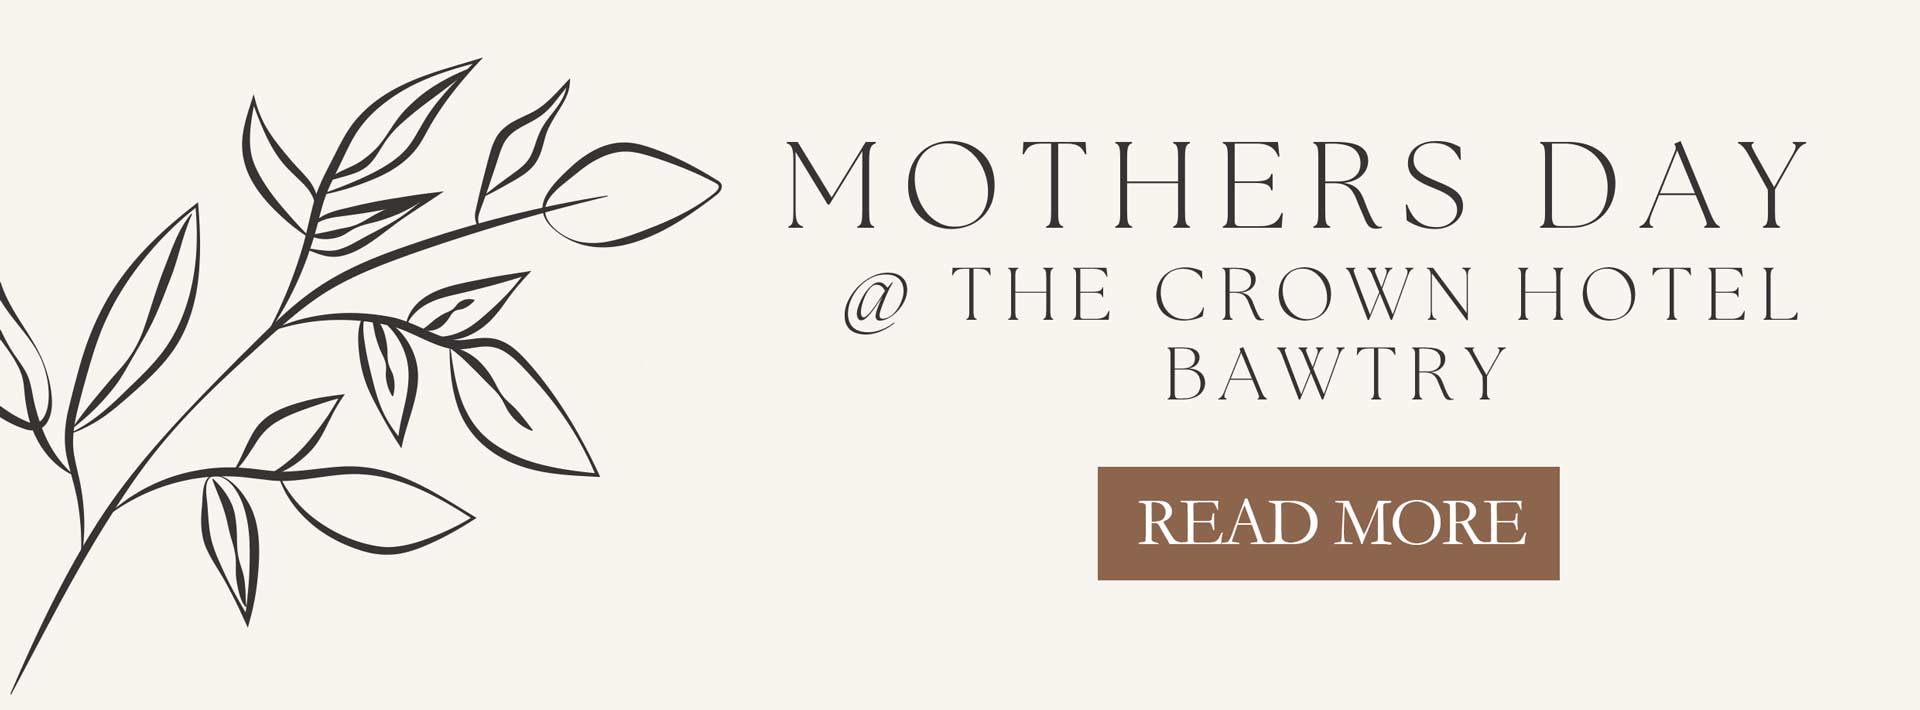 Mother's Day at the Crown Hotel